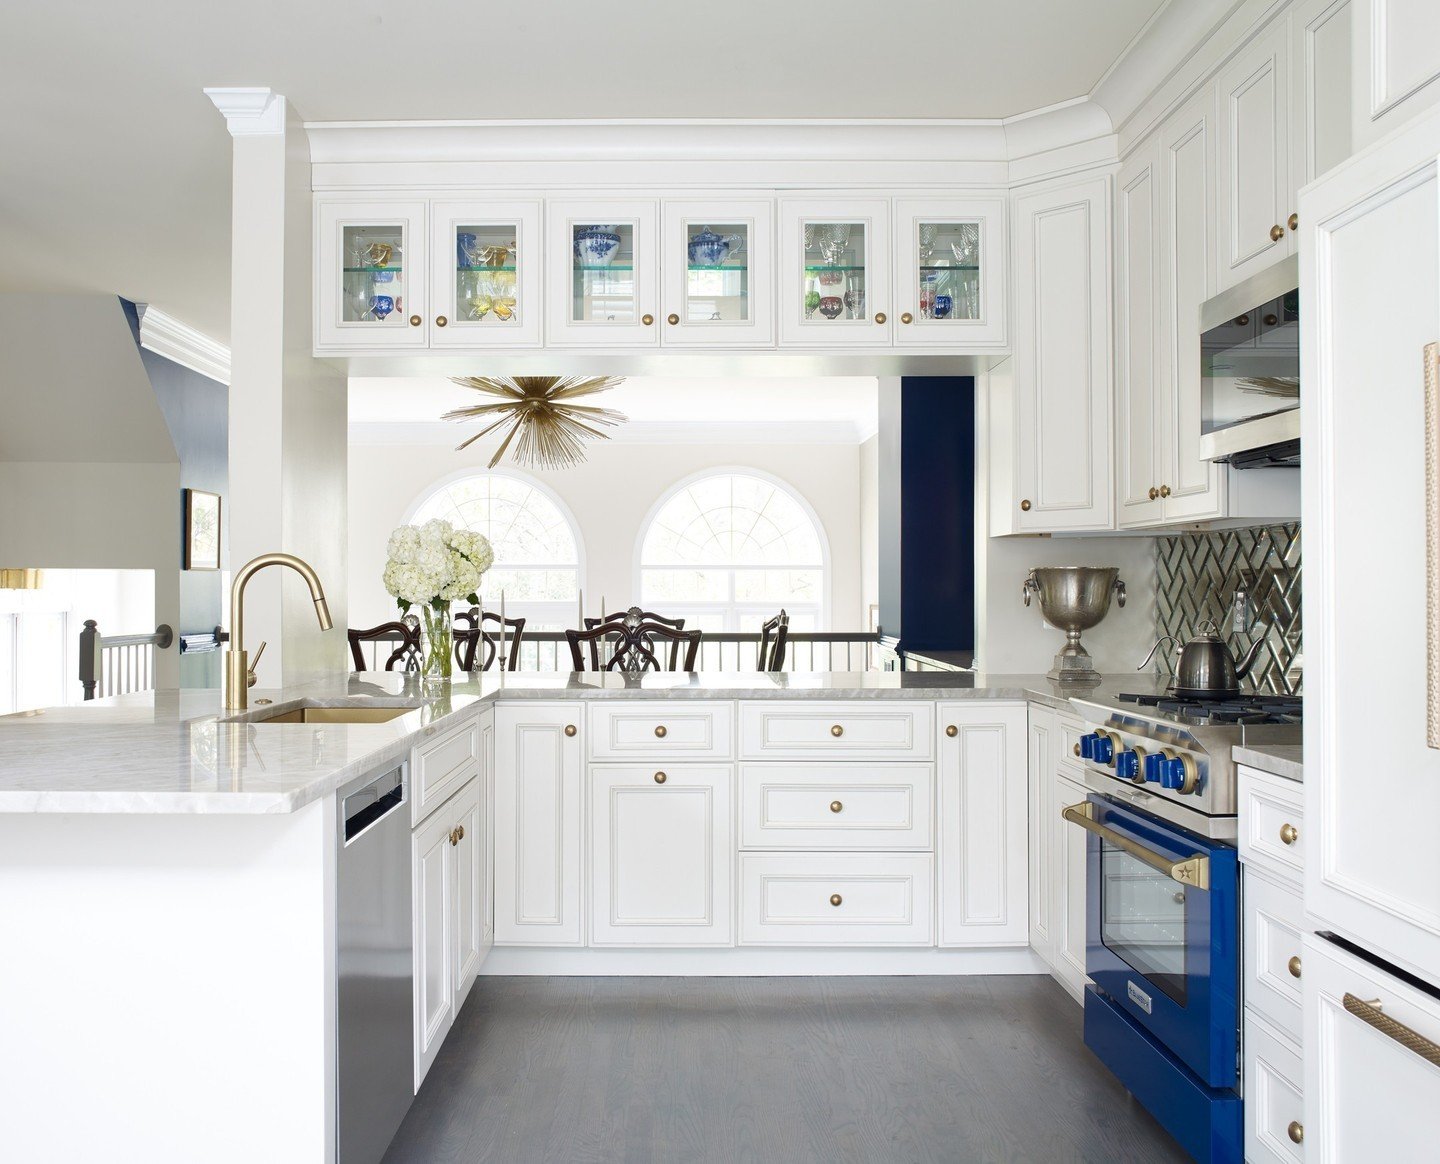 In this kitchen, timeless elegance meets modern functionality with clean lines, sleek surfaces, and enduring design elements. A classic white palette ensures this space remains eternally stylish.